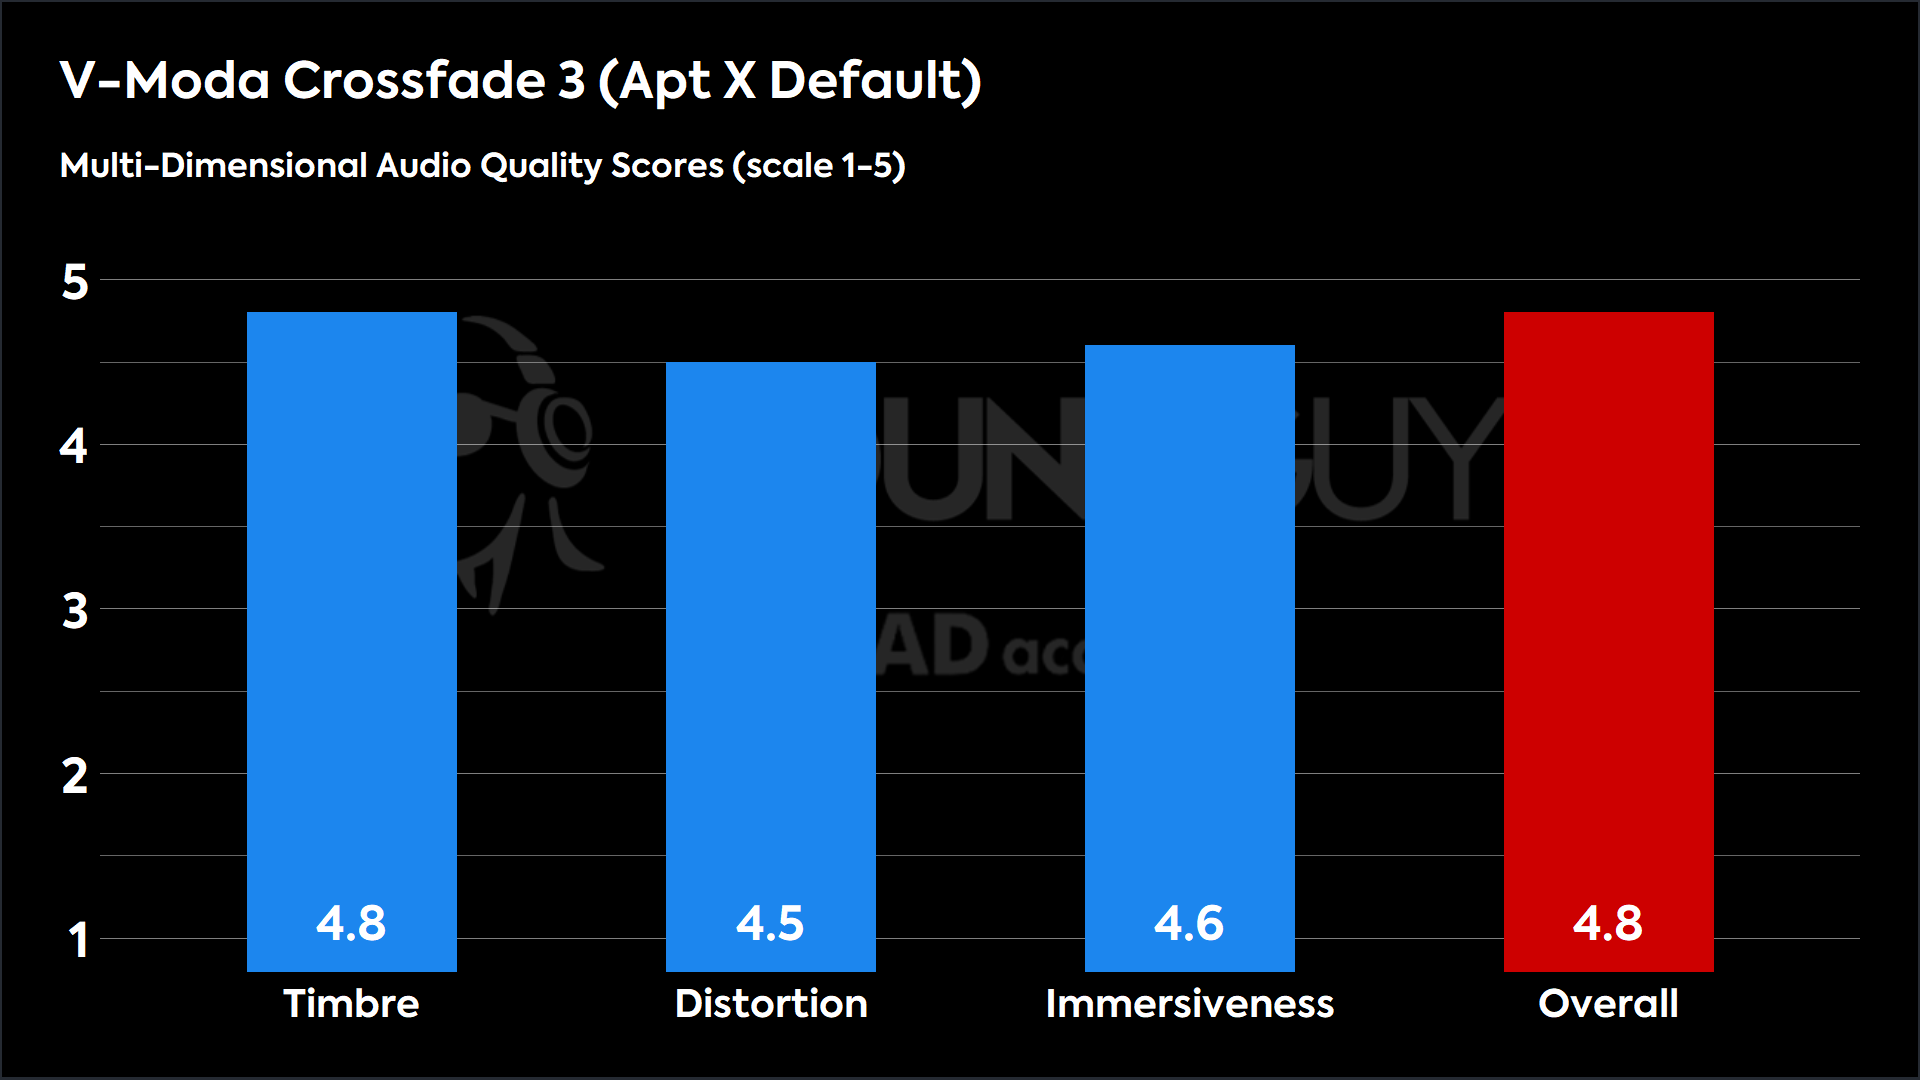 This chart shows the MDAQS results for the V-Moda Crossfade 3 in Apt X Default mode. The Timbre score is 4.8, The Distortion score is 4.5, the Immersiveness score is 4.6, and the Overall Score is 4.8).